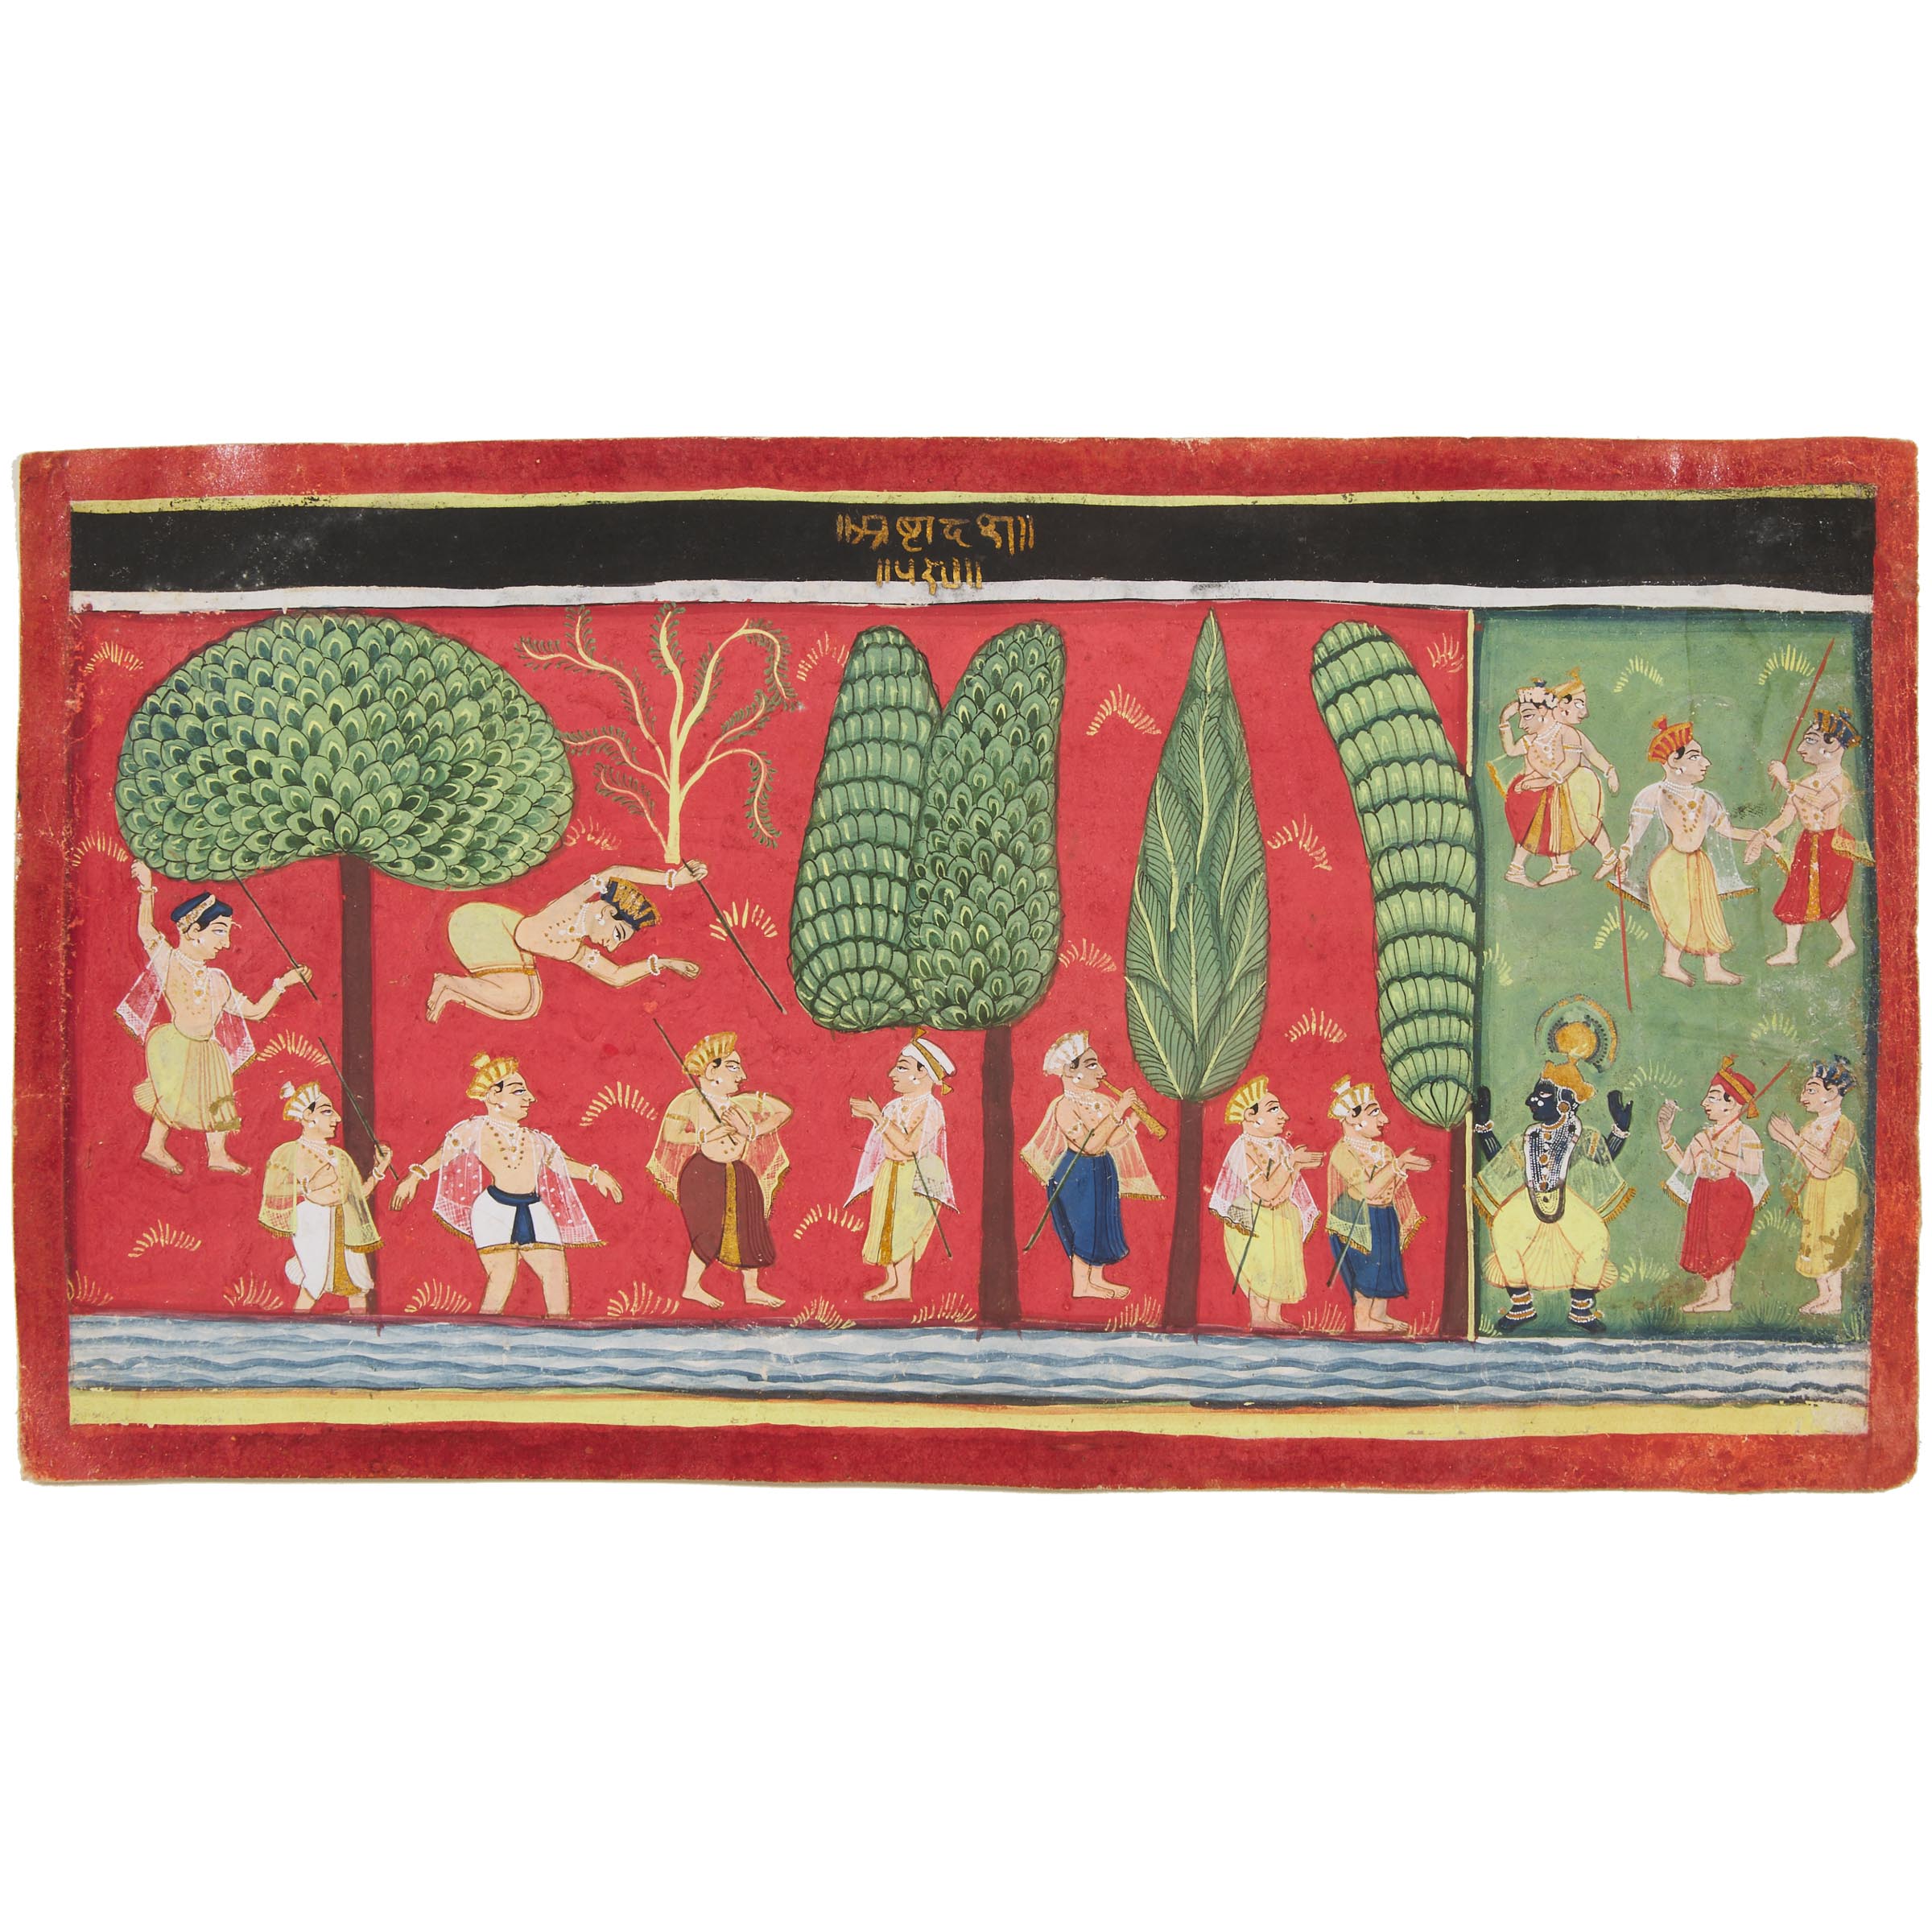 Rajasthan School, Krishna in the Forest, 18th Century